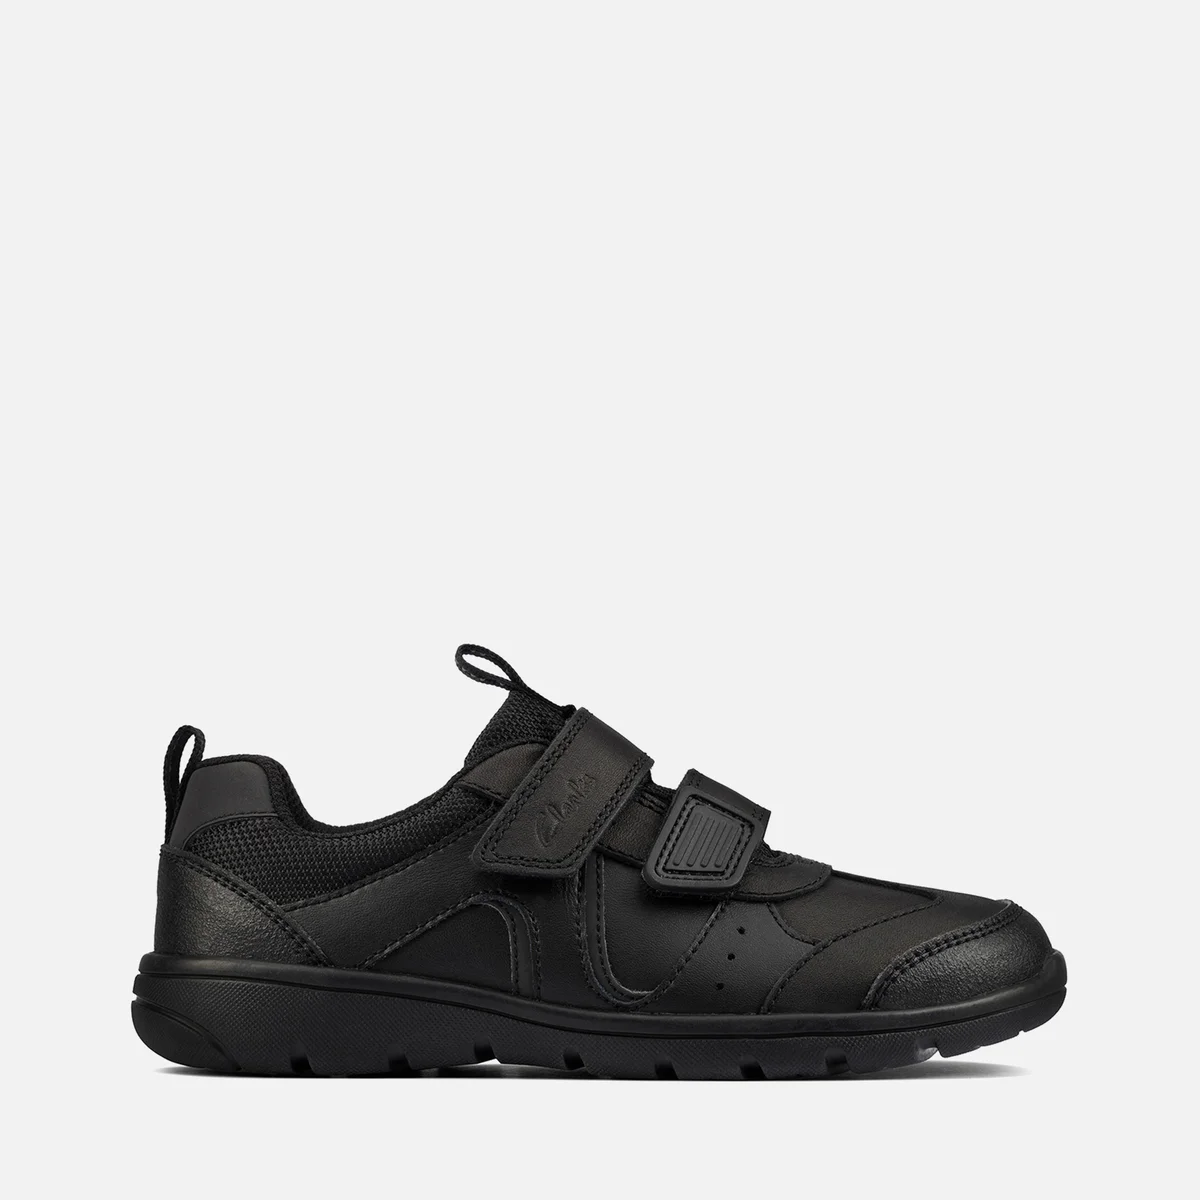 Clarks Kids' Scooter Run School Shoes - Black Leather Image 1